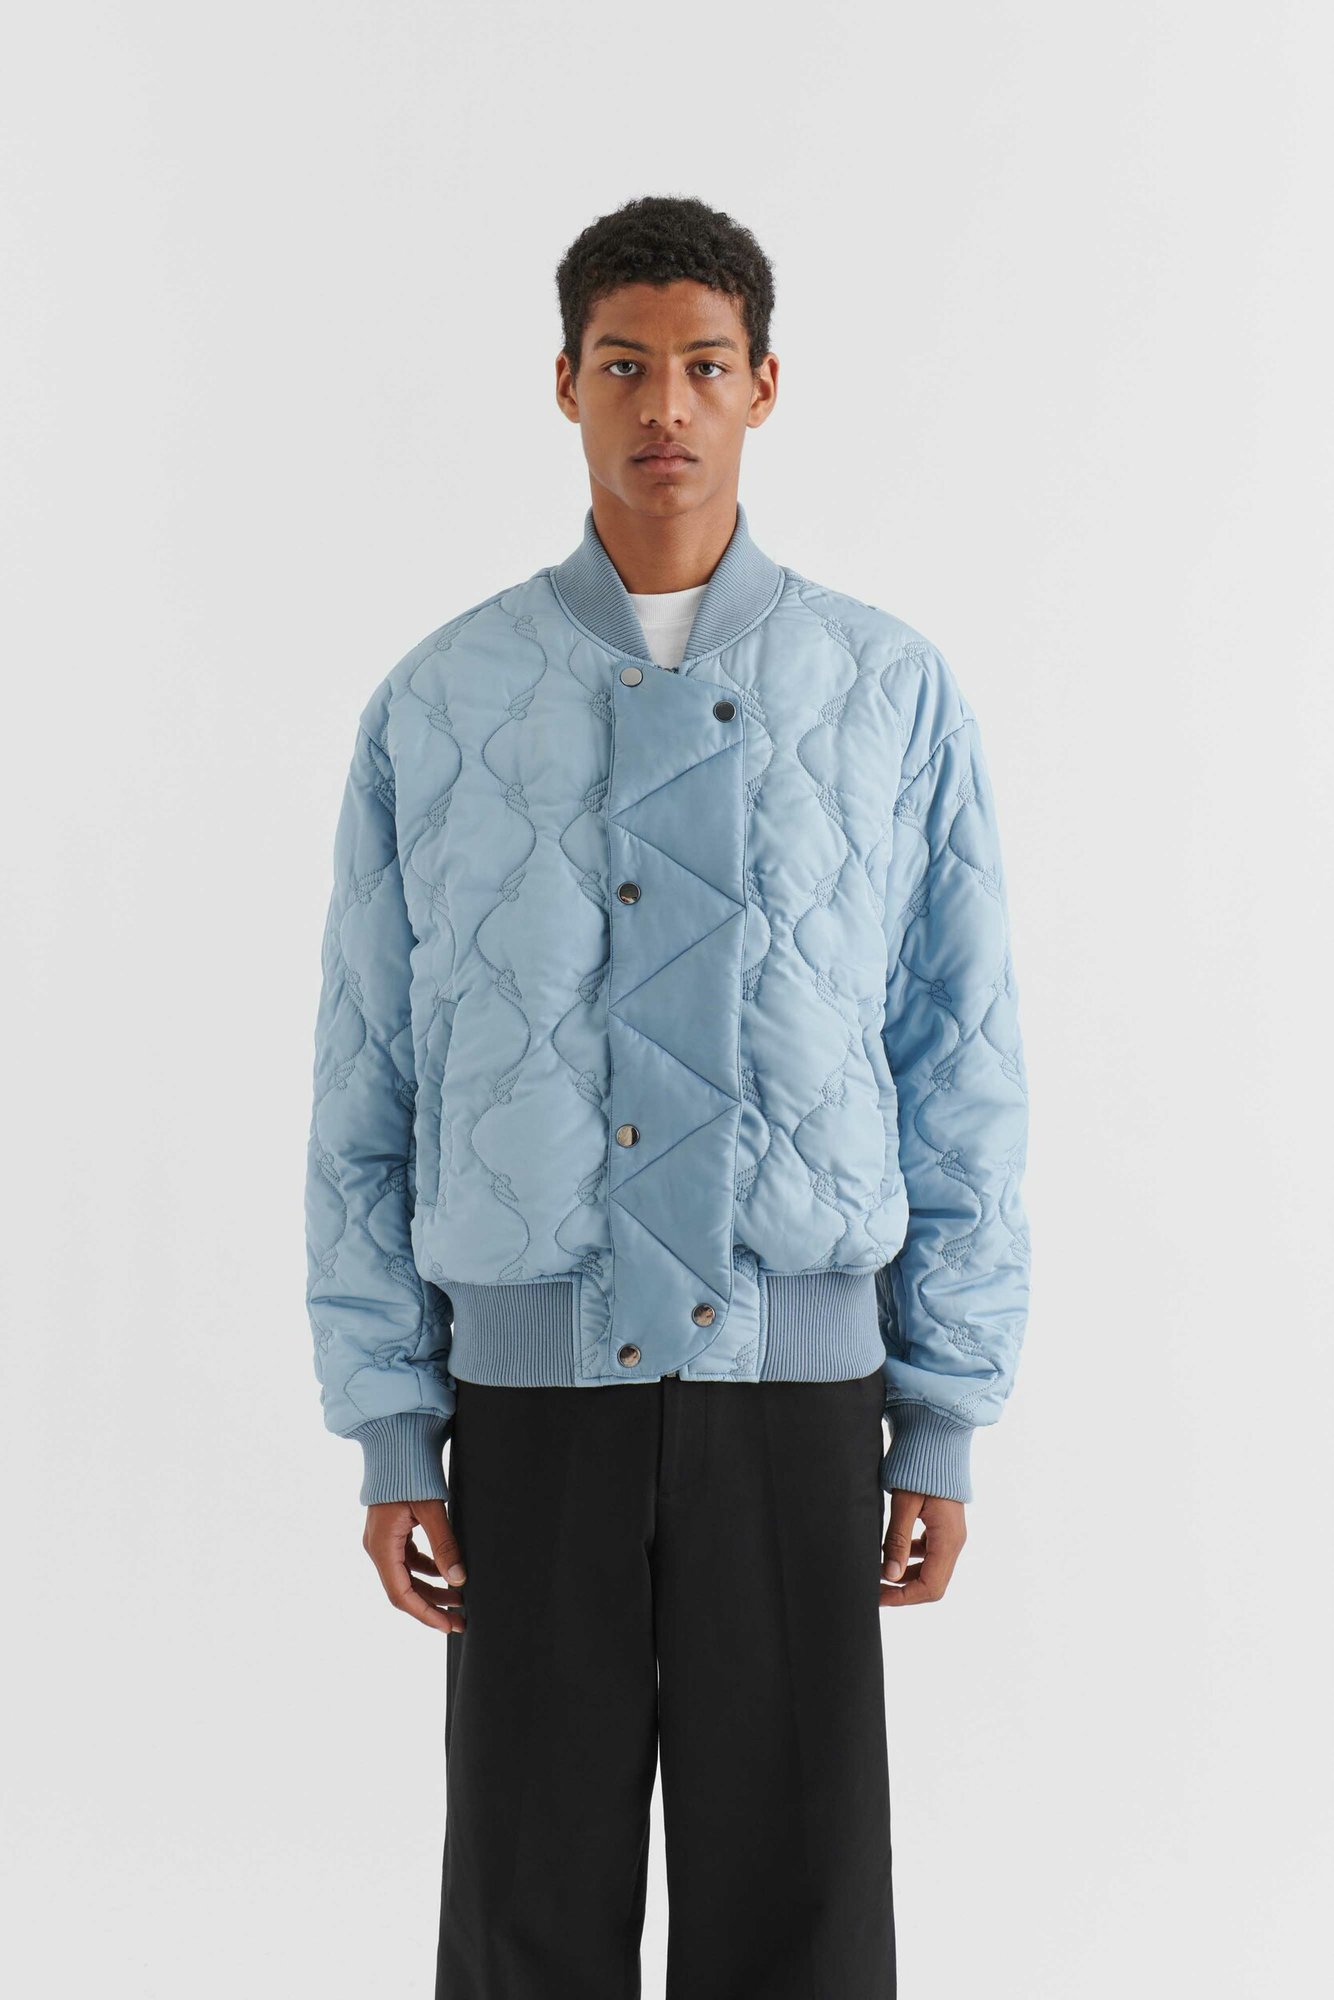 AXEL ARIGATO Annex Bomber Jacket in Bleached Blue S